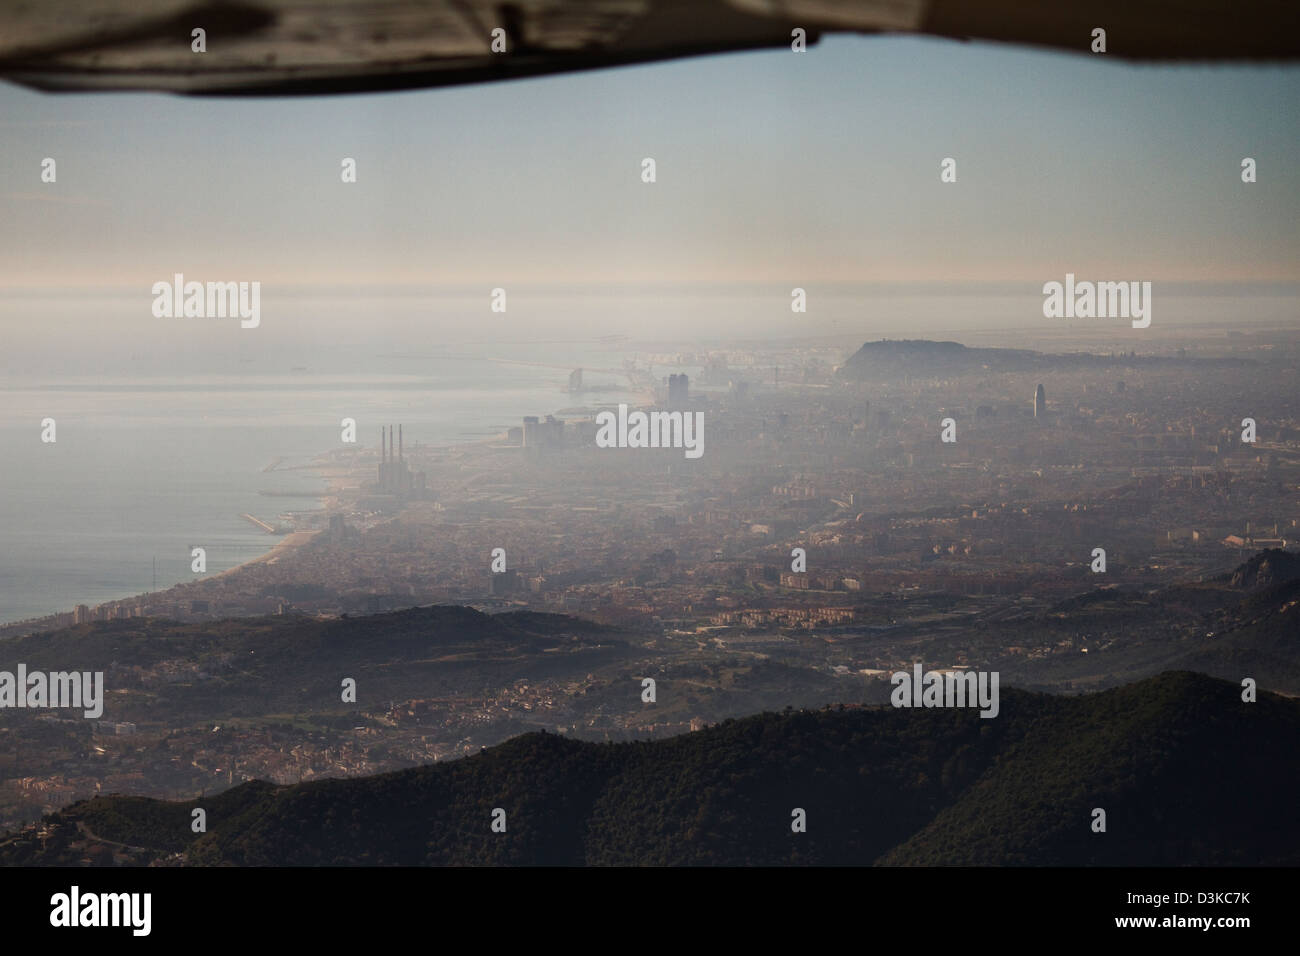 Barcelona panorama view from Cessna airplane Stock Photo